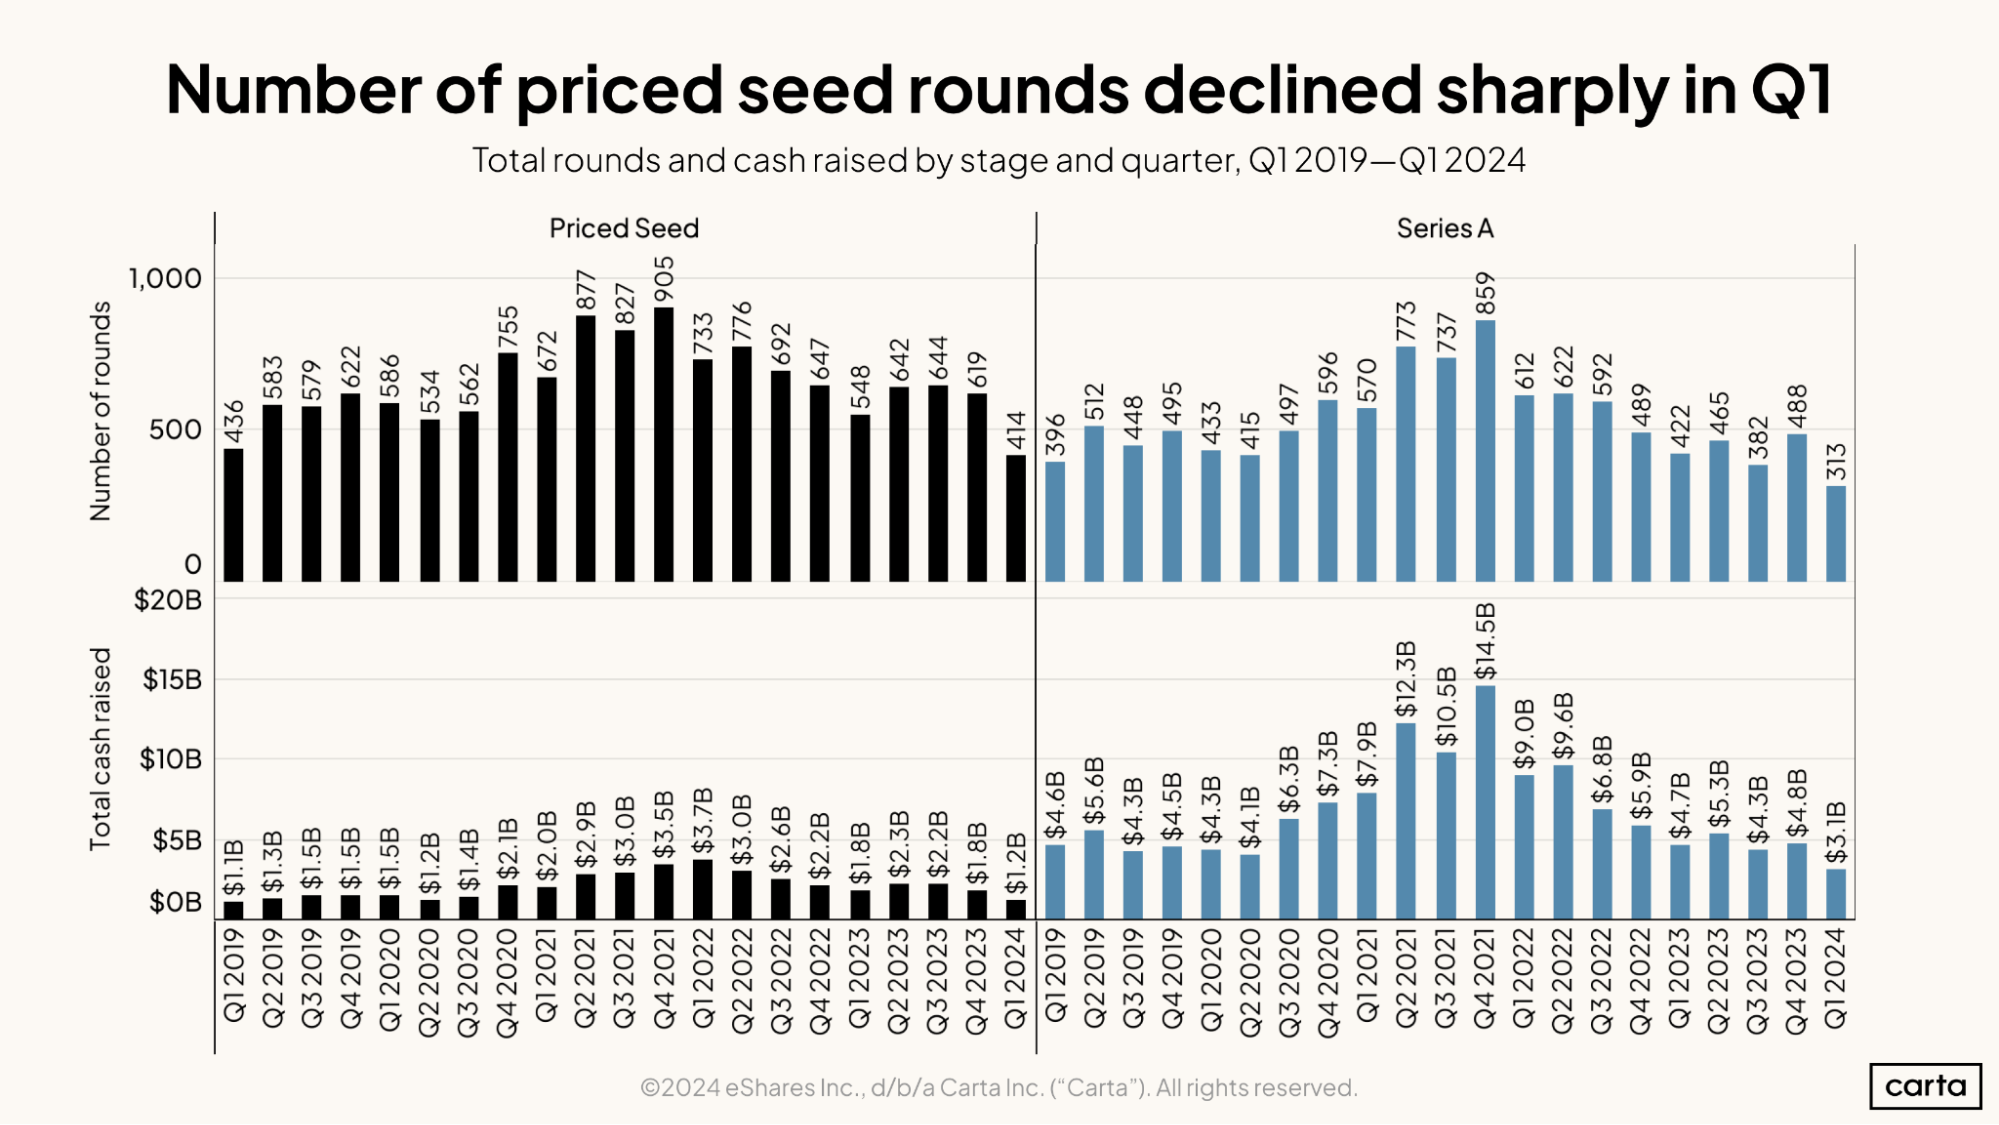 Number of priced seed rounds declined sharply in Q1